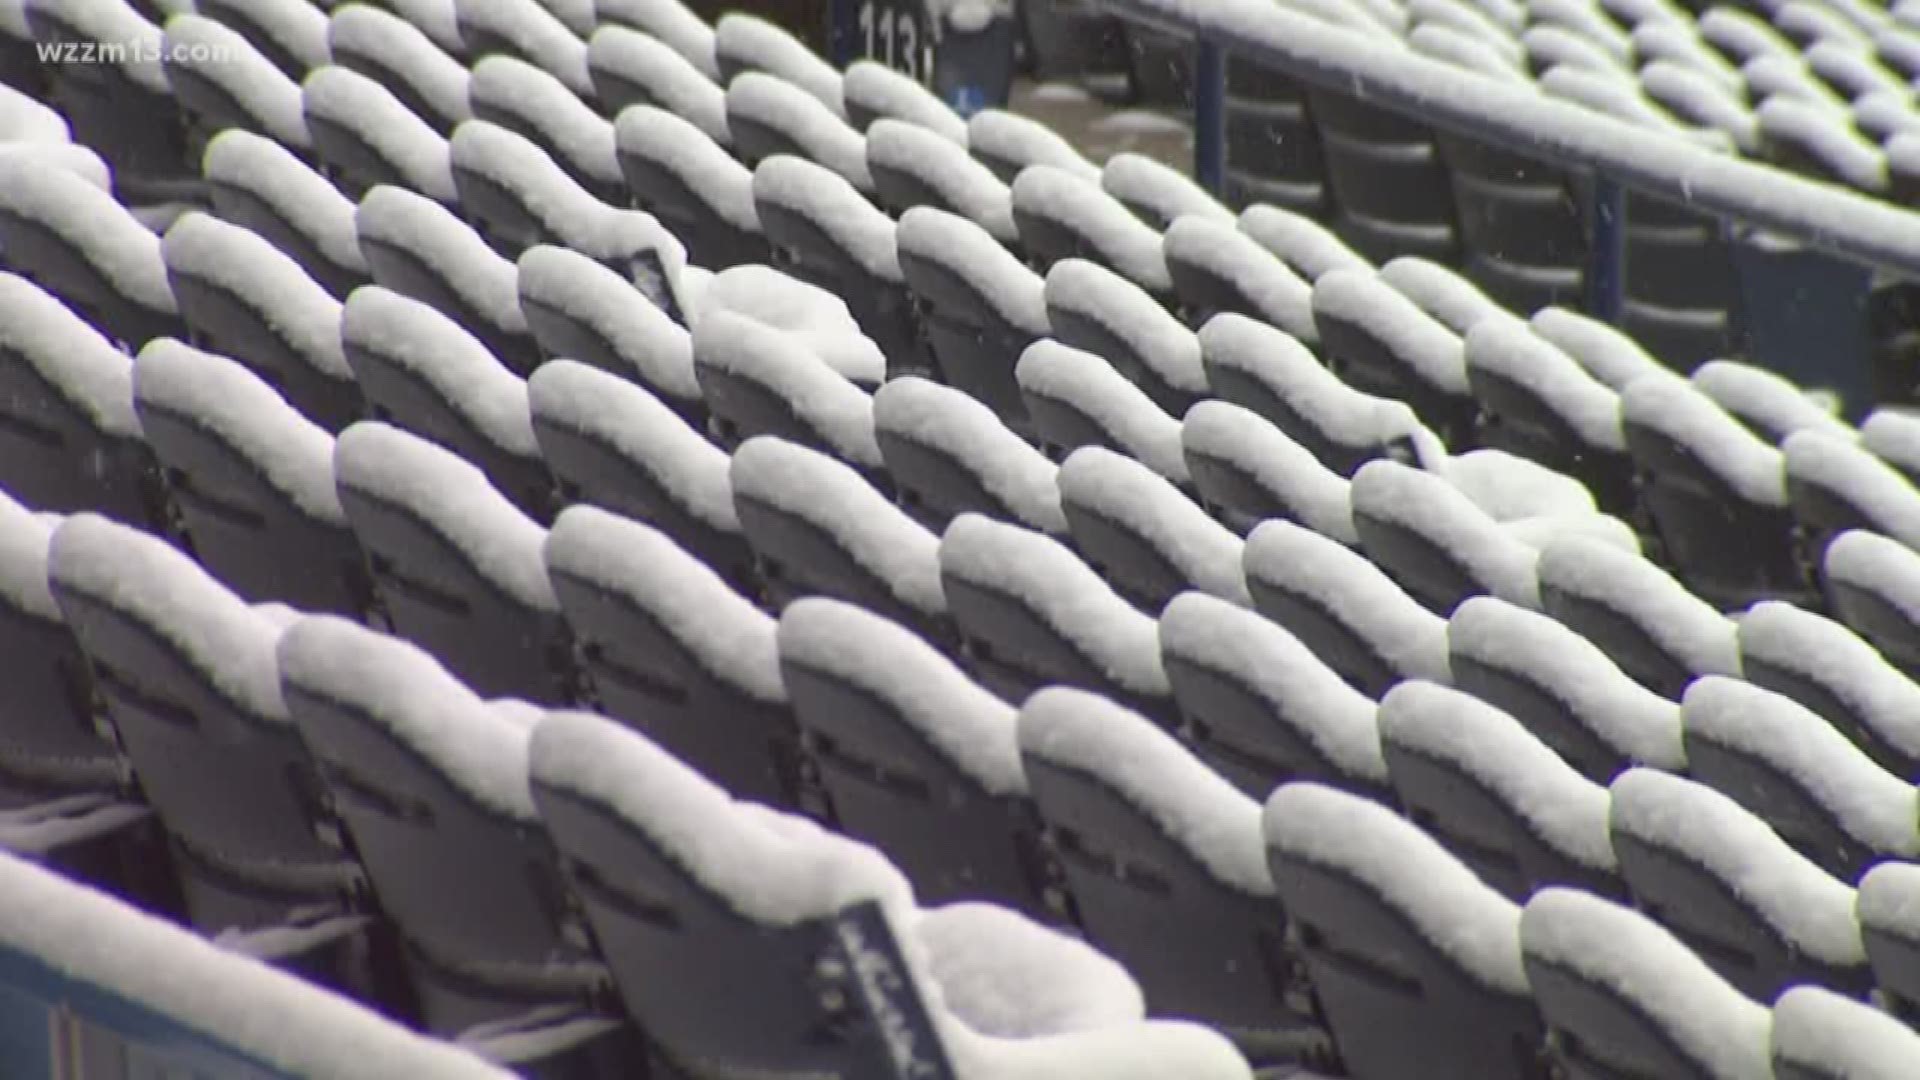 Fifth Third Ballpark covered in snow on Opening Day eve